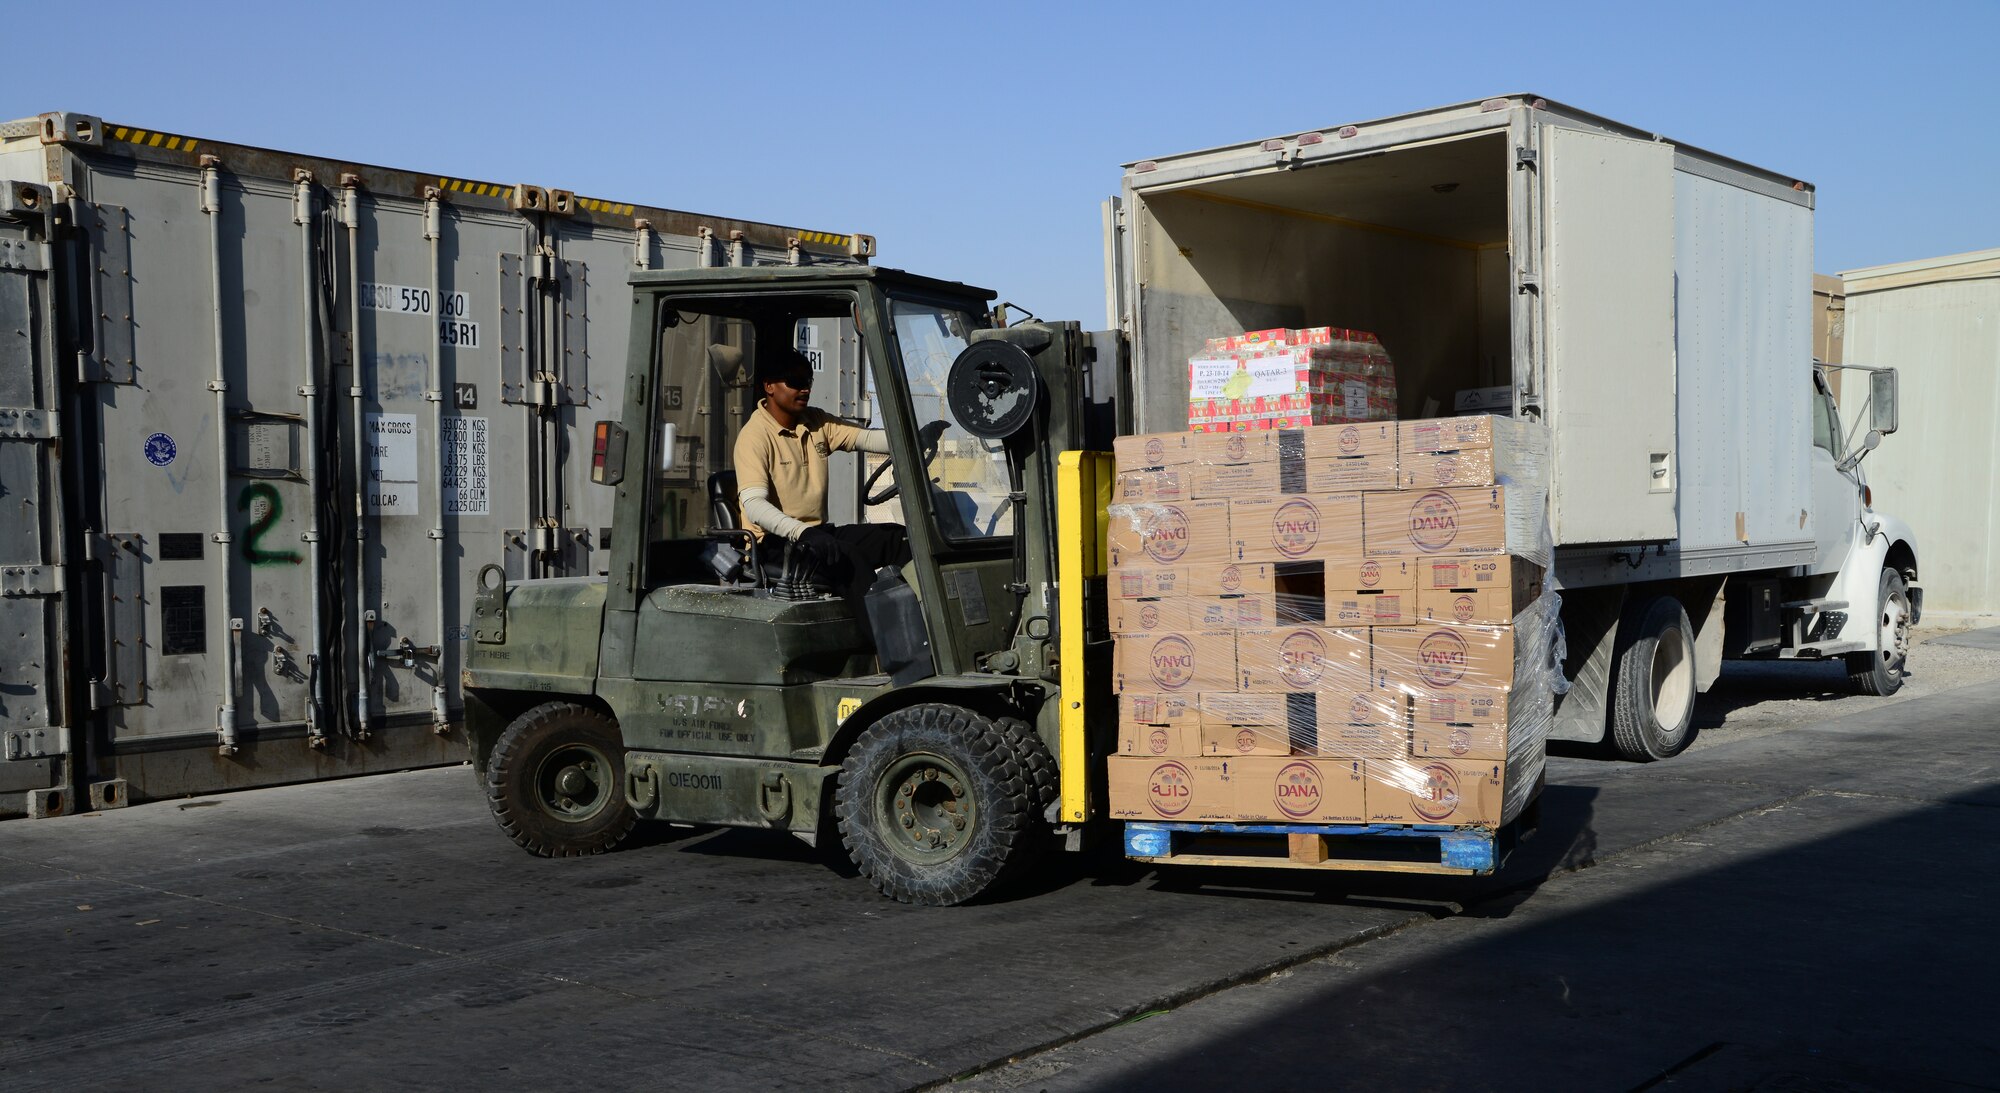 Boxes of food and drinks are unloaded for the annual Thanksgiving meal, Nov. 27, 2014, at Al Udeid Air Base, Qatar. More than a couple thousand pounds of food was ordered for deployed servicemembers to enjoy, which included more than 400 turkeys.  (U.S. Air Force photo by Senior Airman Kia Atkins)